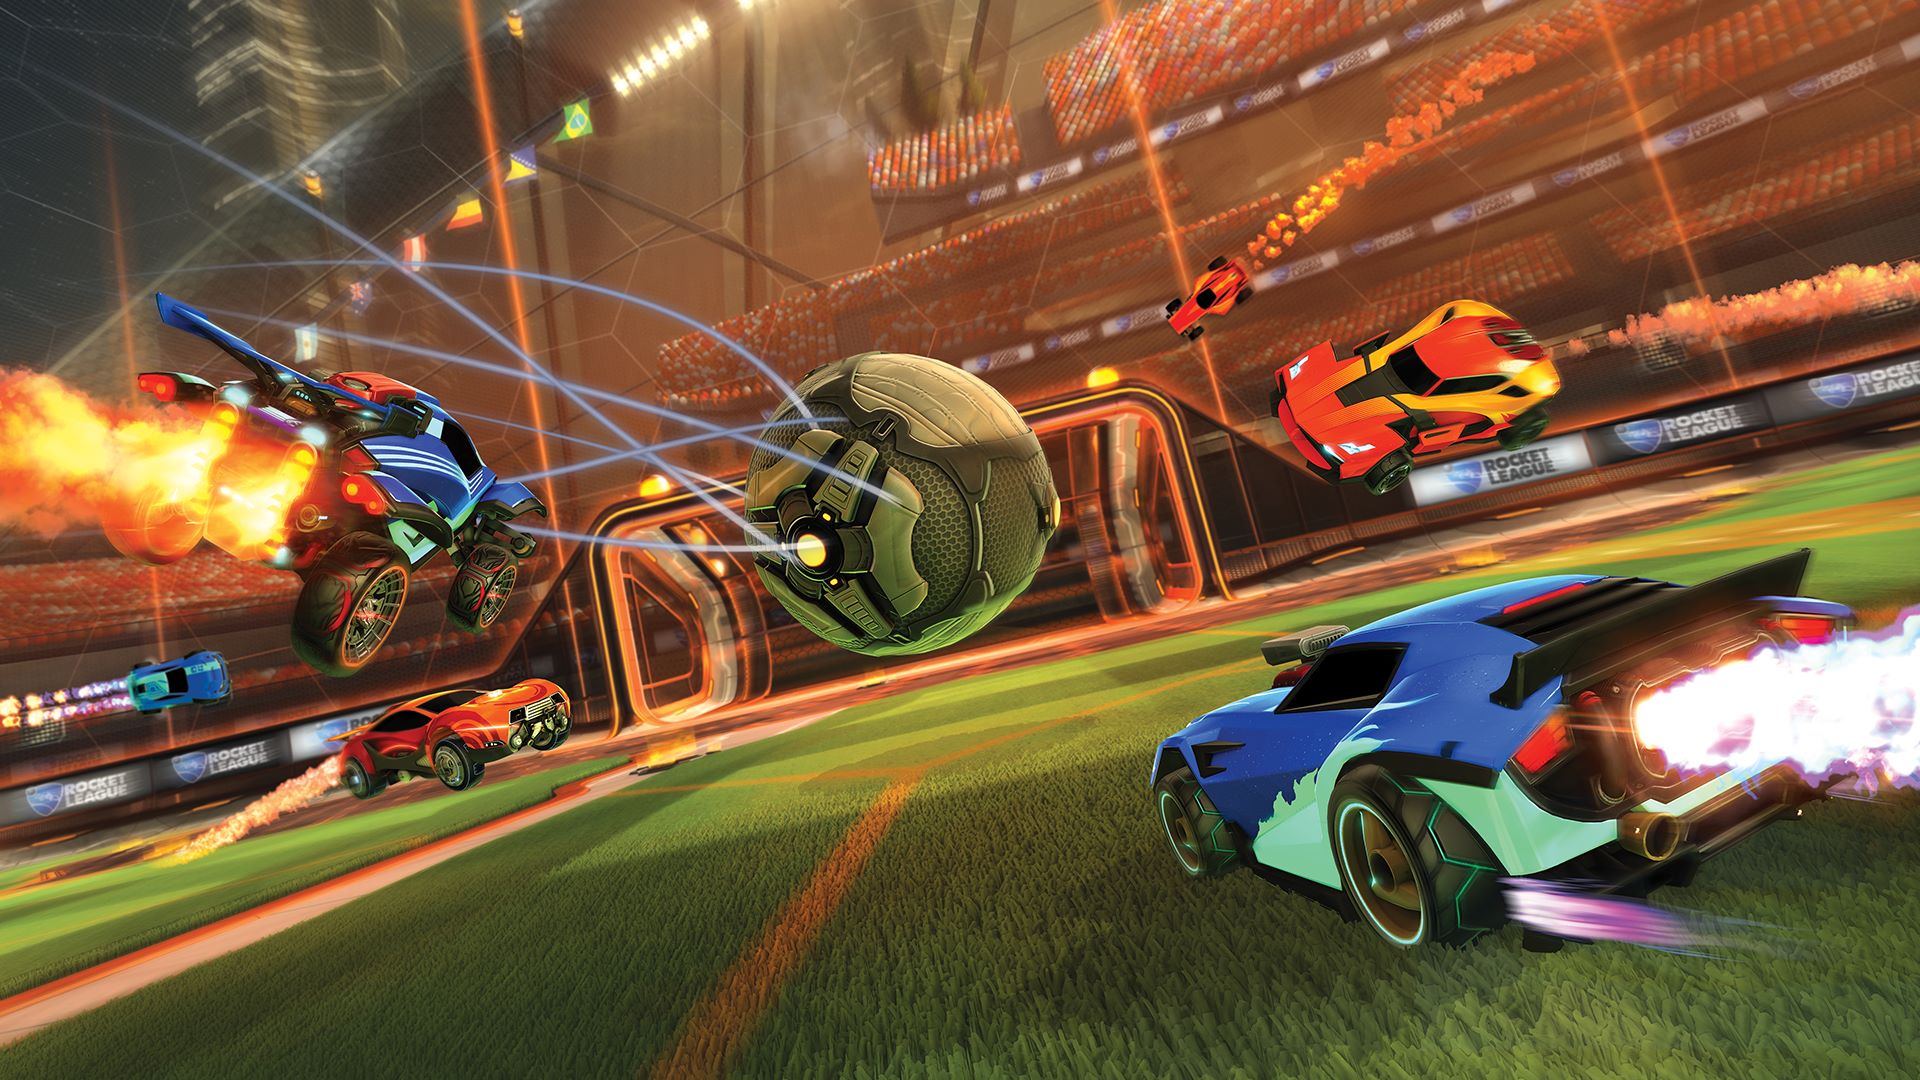 Rocket League will now get cross-play support for PlayStation 4!